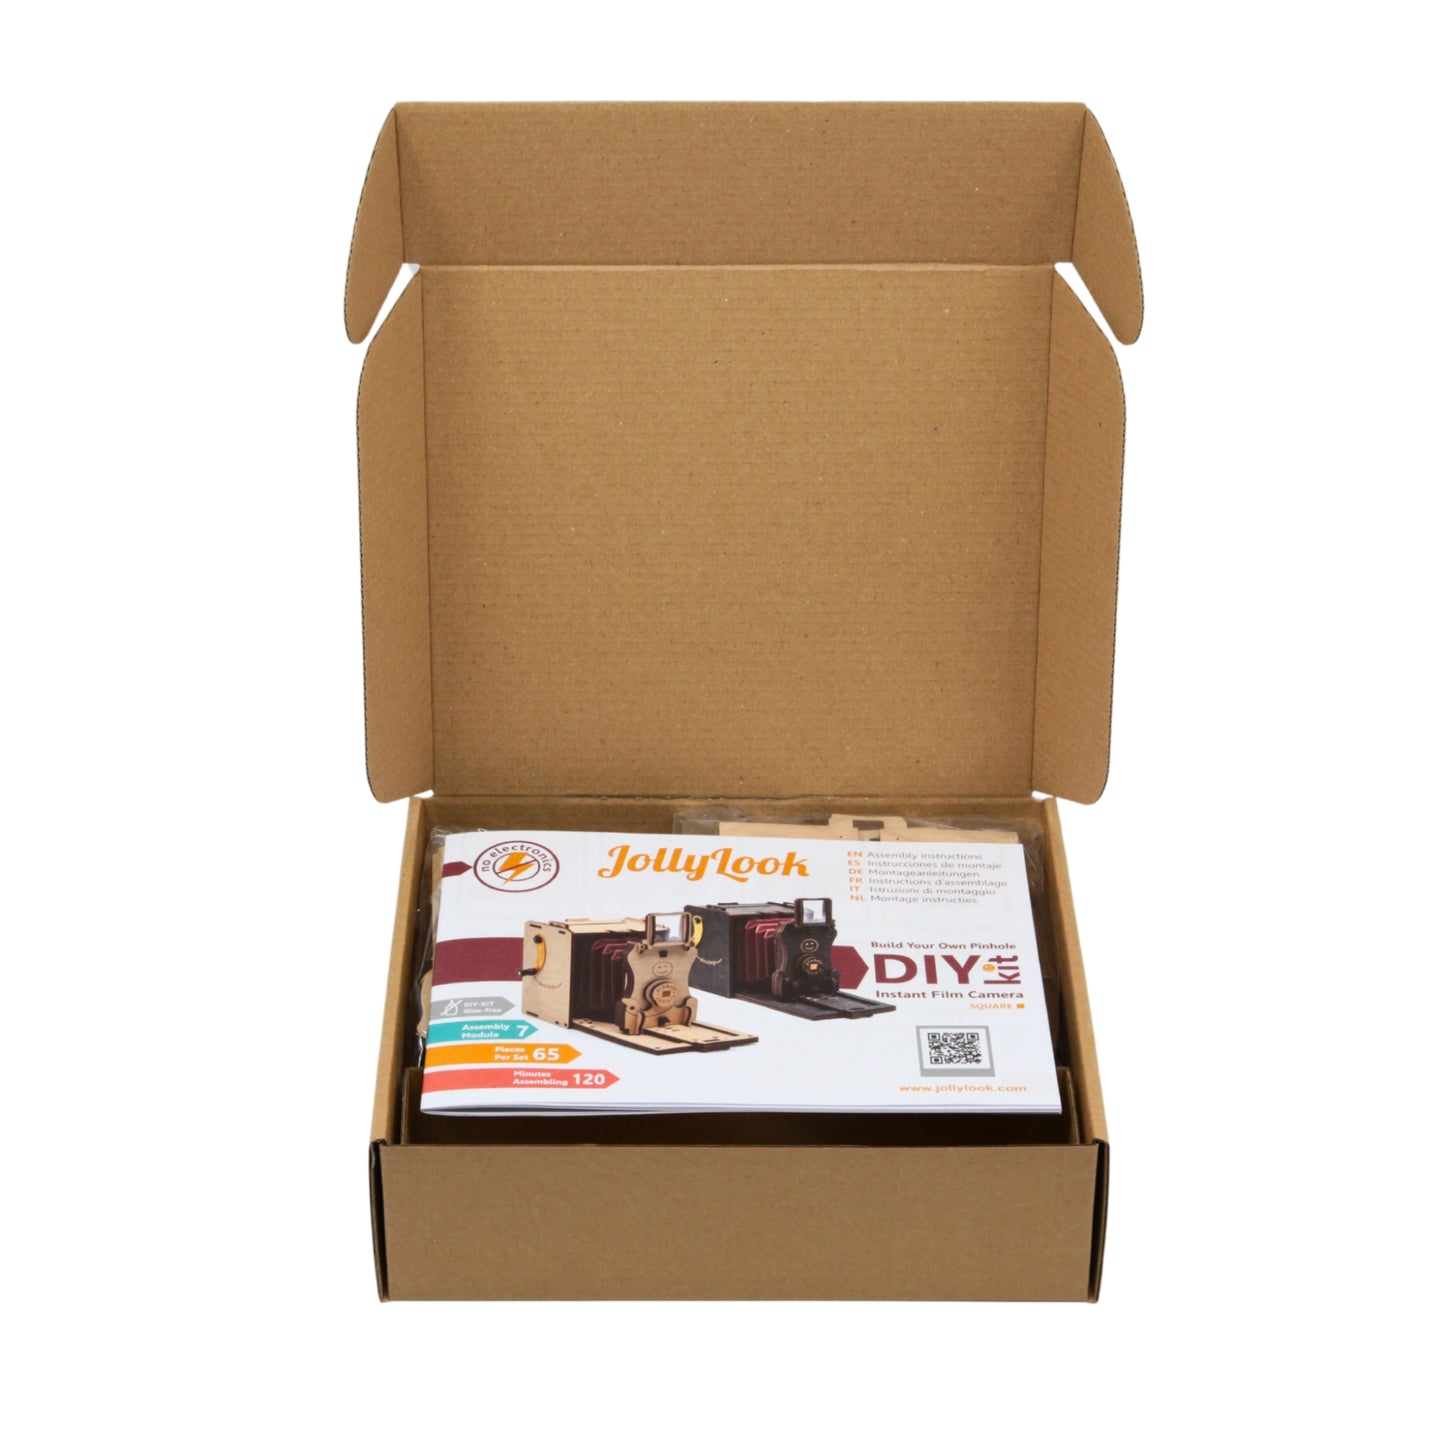 An opened brown packaging box containing the Natural Wood DIY Pinhole Instant SQUARE Film Camera Kit for self-assembly, is displayed against a clean white background. The box lays invitingly open, revealing a peek of the package inside, which is intended to craft your own pinhole camera.